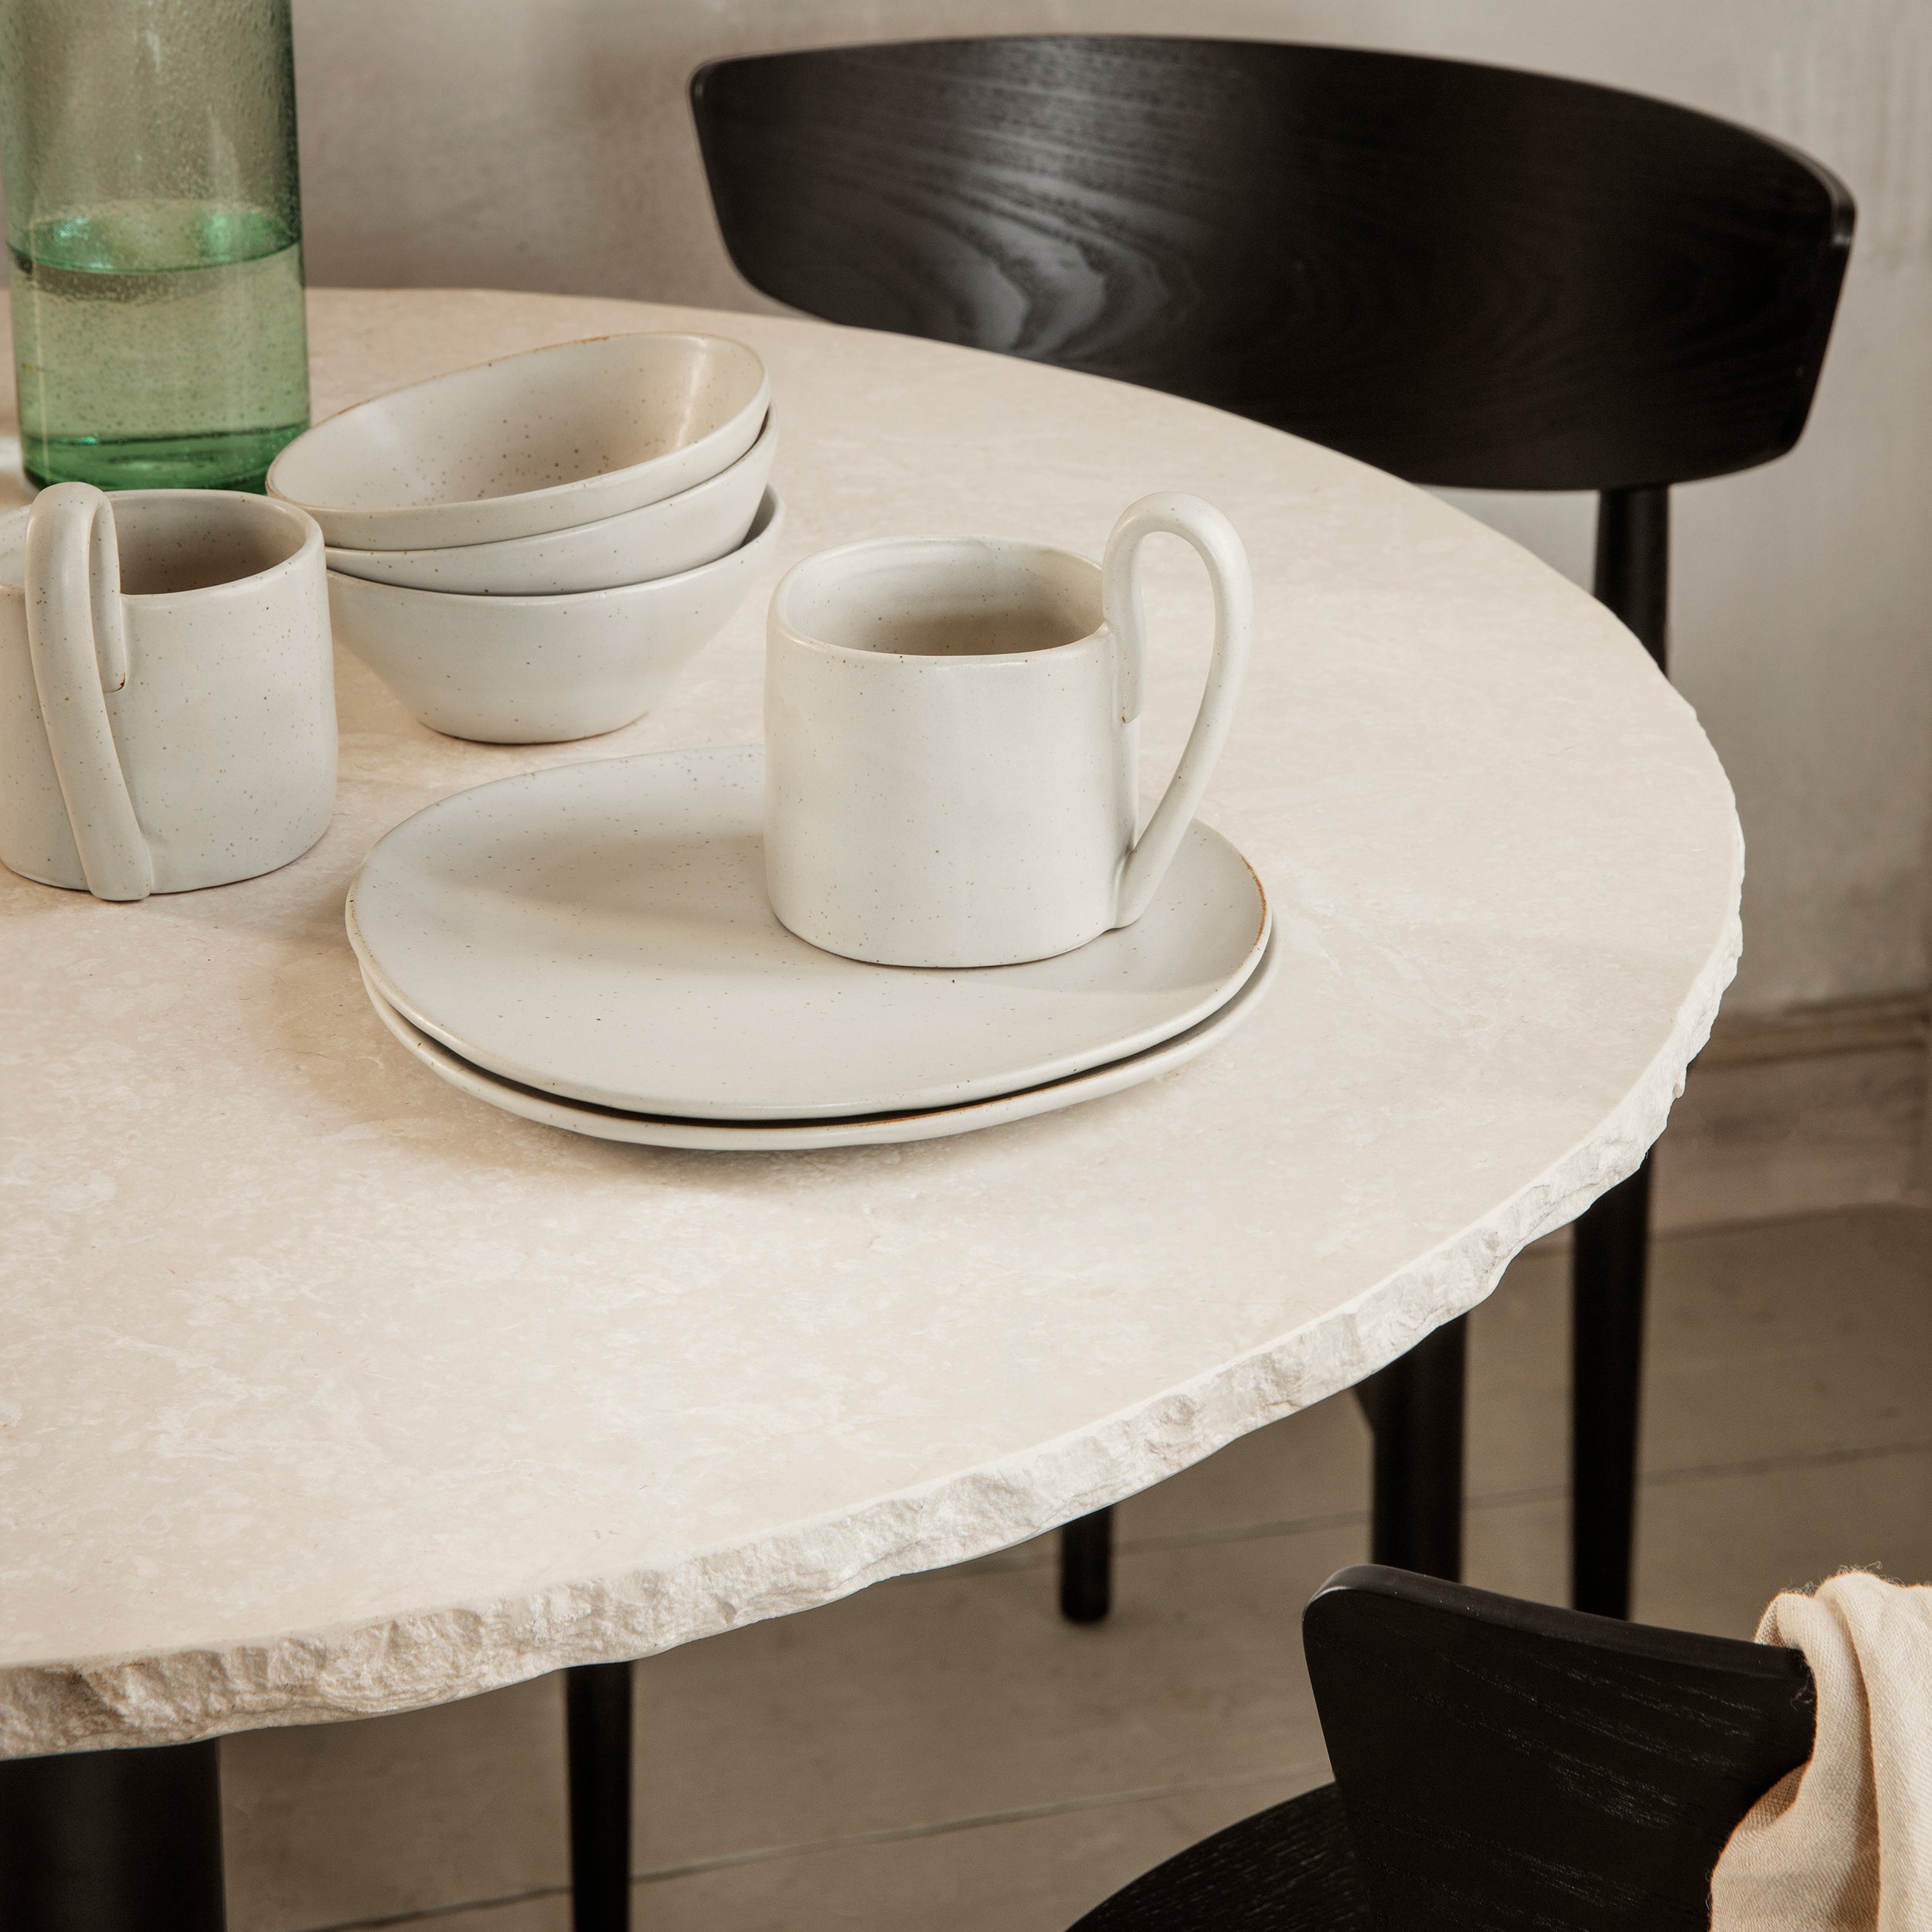 Mineral Dining Table